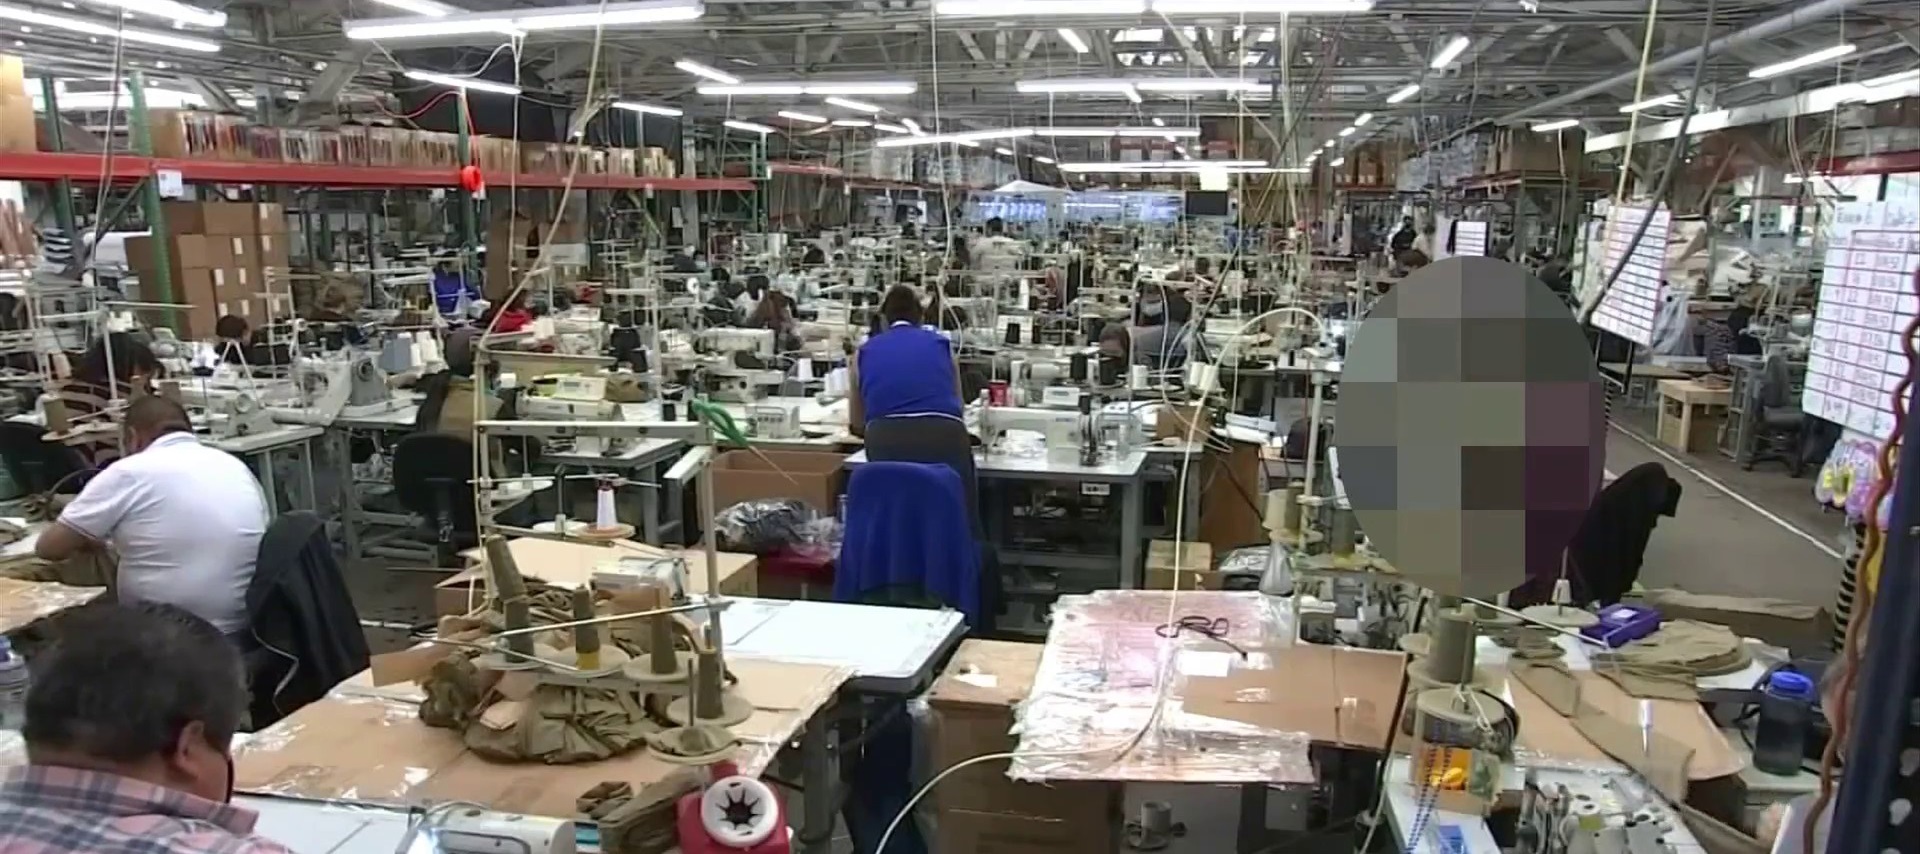 Three Garment Workers on LA Apparel's Deadly COVID Outbreak